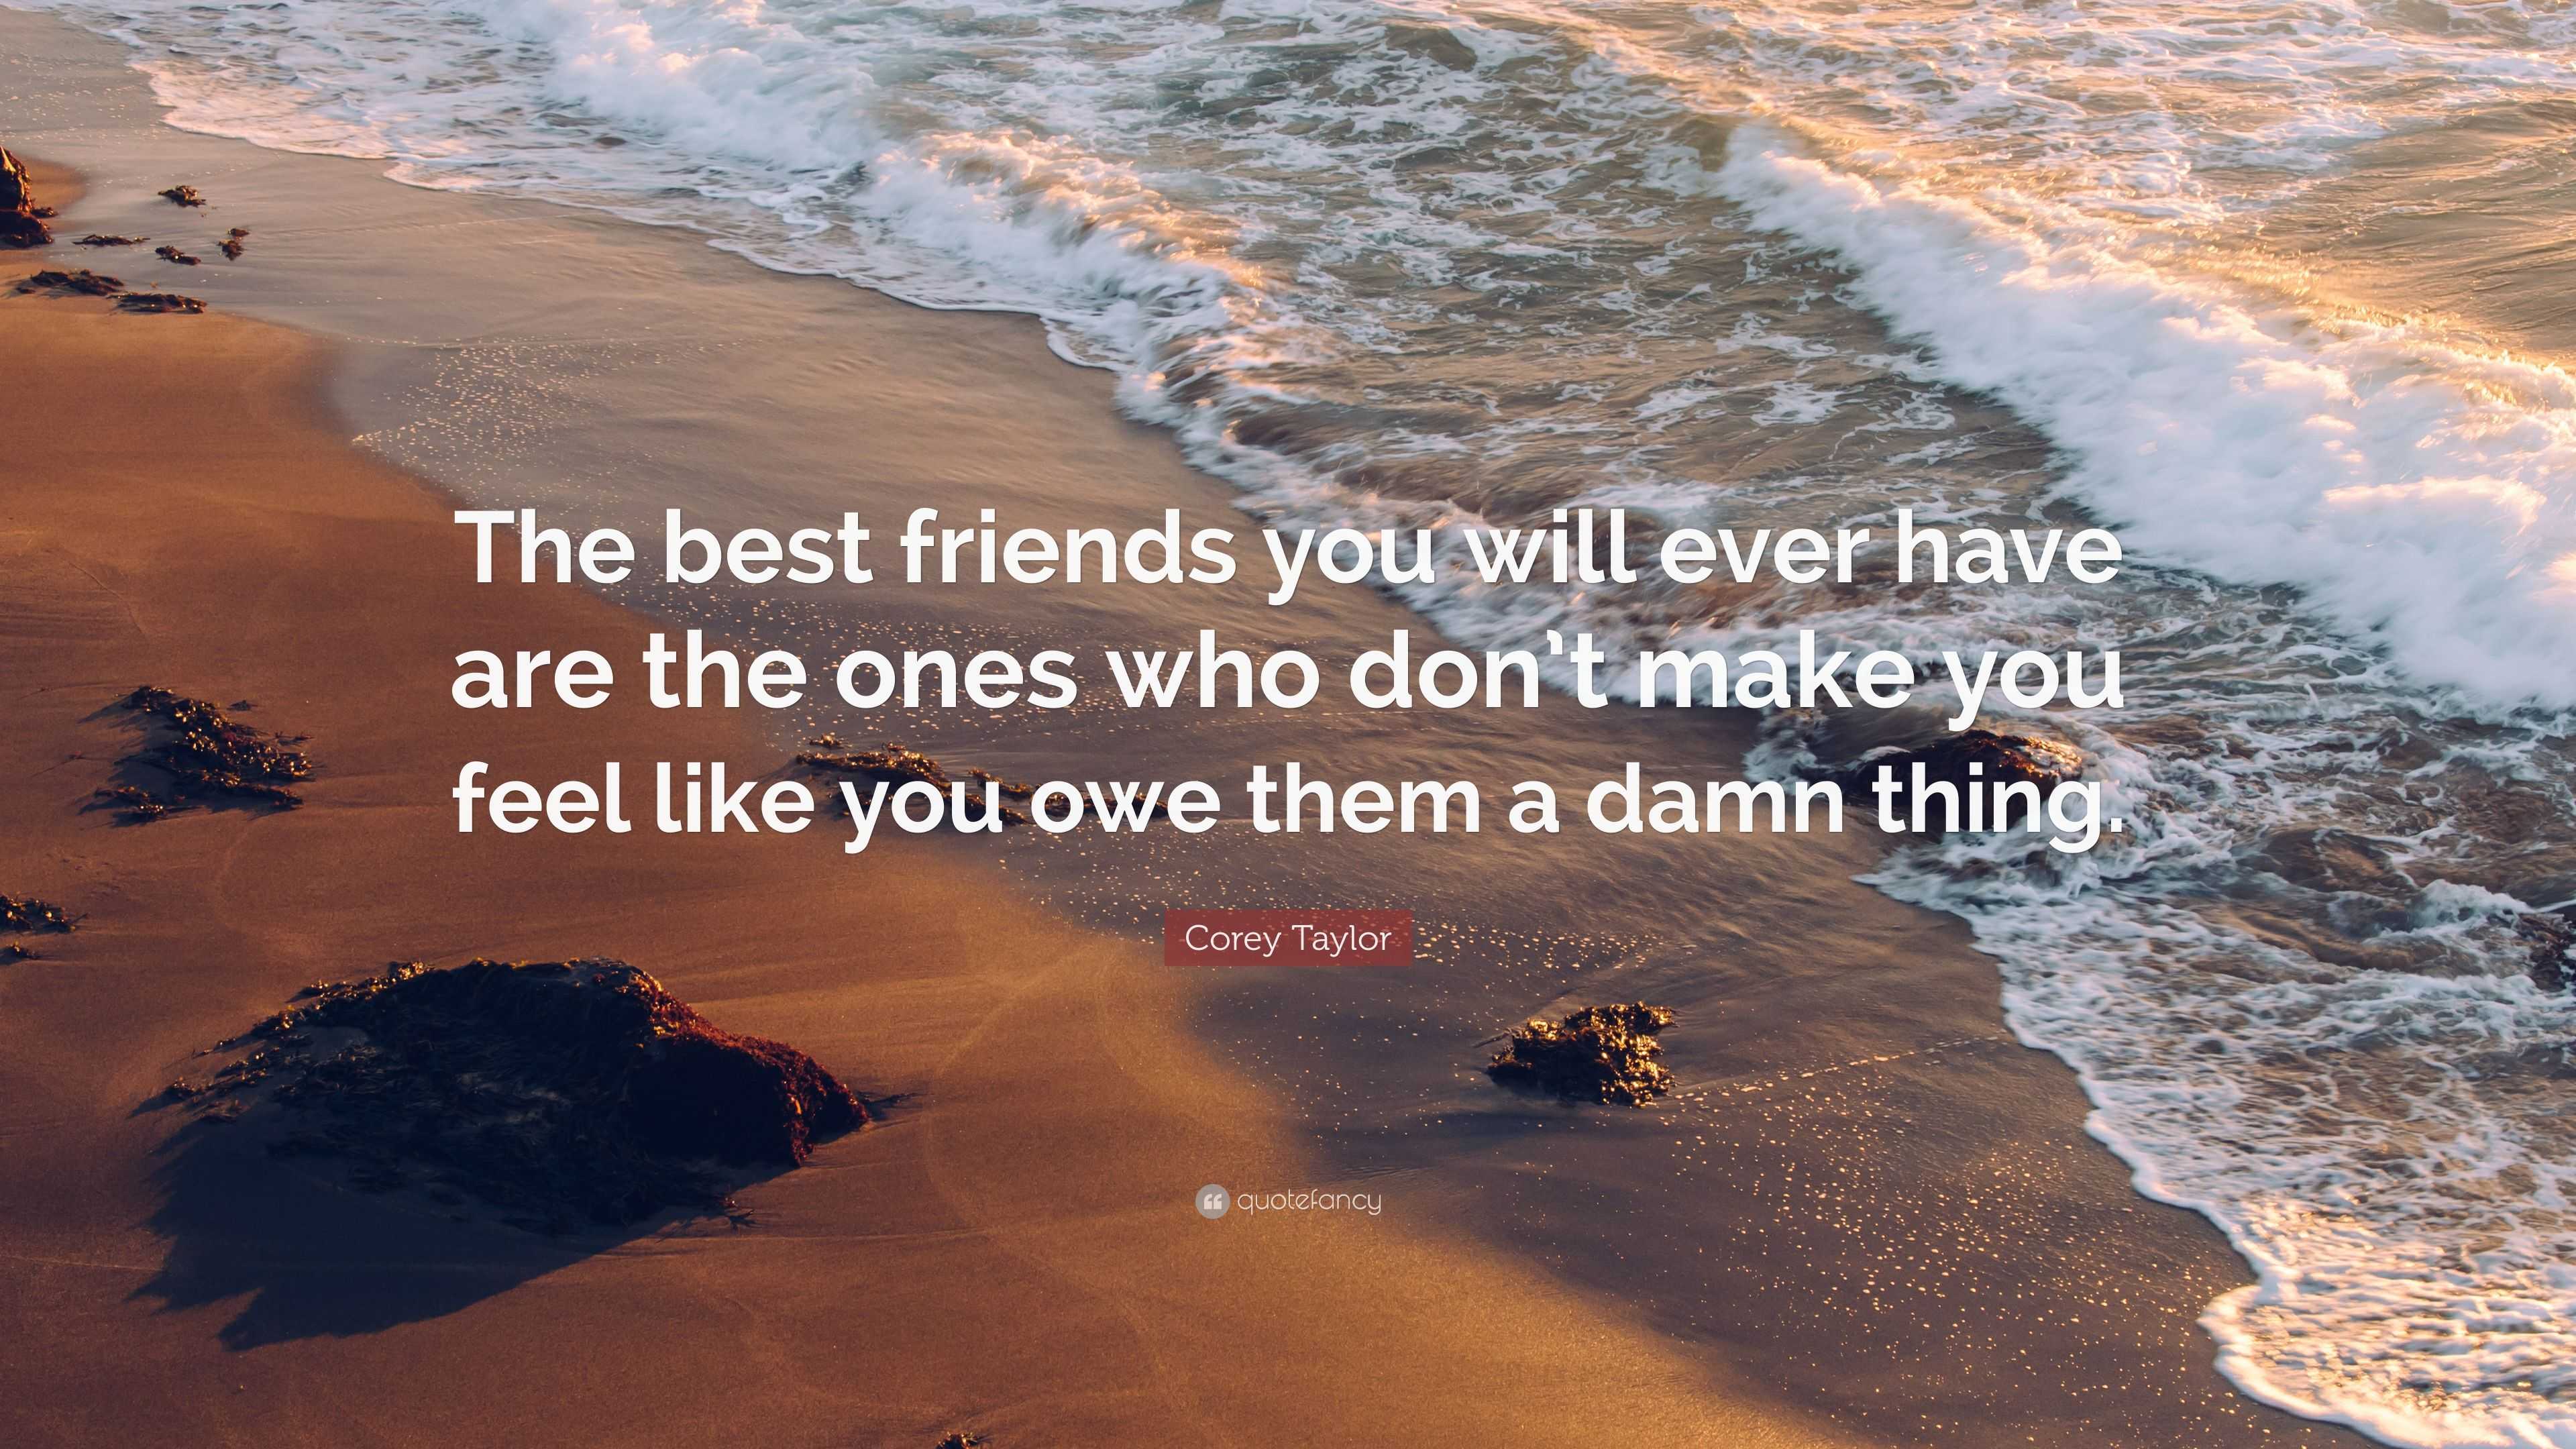 Corey Taylor Quote: “The best friends you will ever have are the ones ...